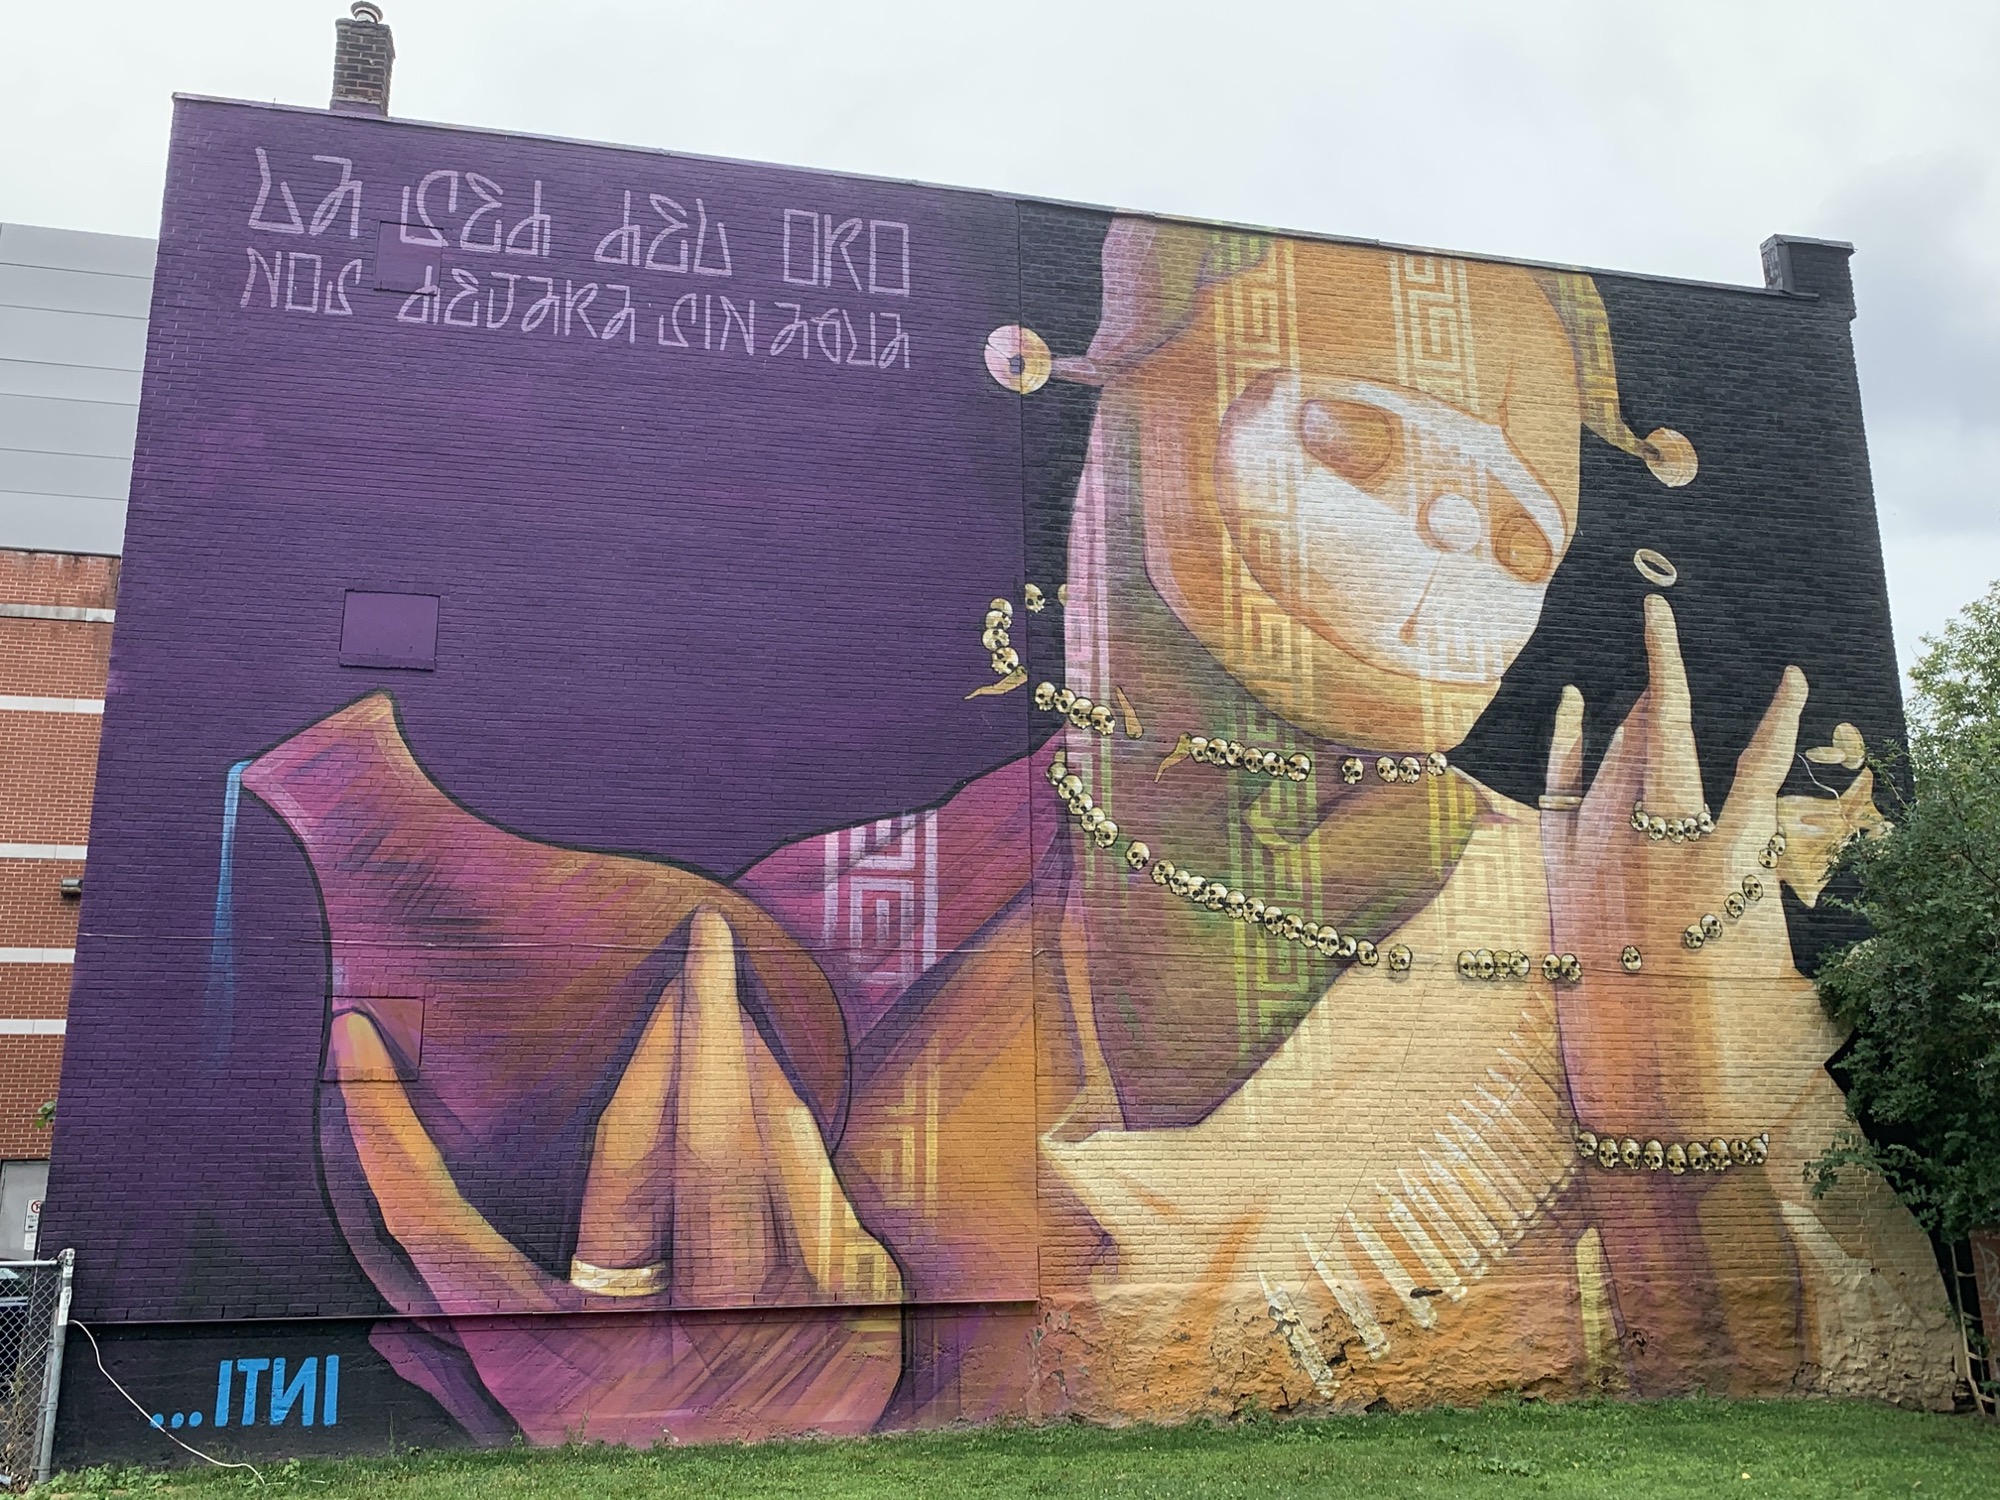 Graffiti 2910  by the artist Inti captured by Rabot in Montréal Canada